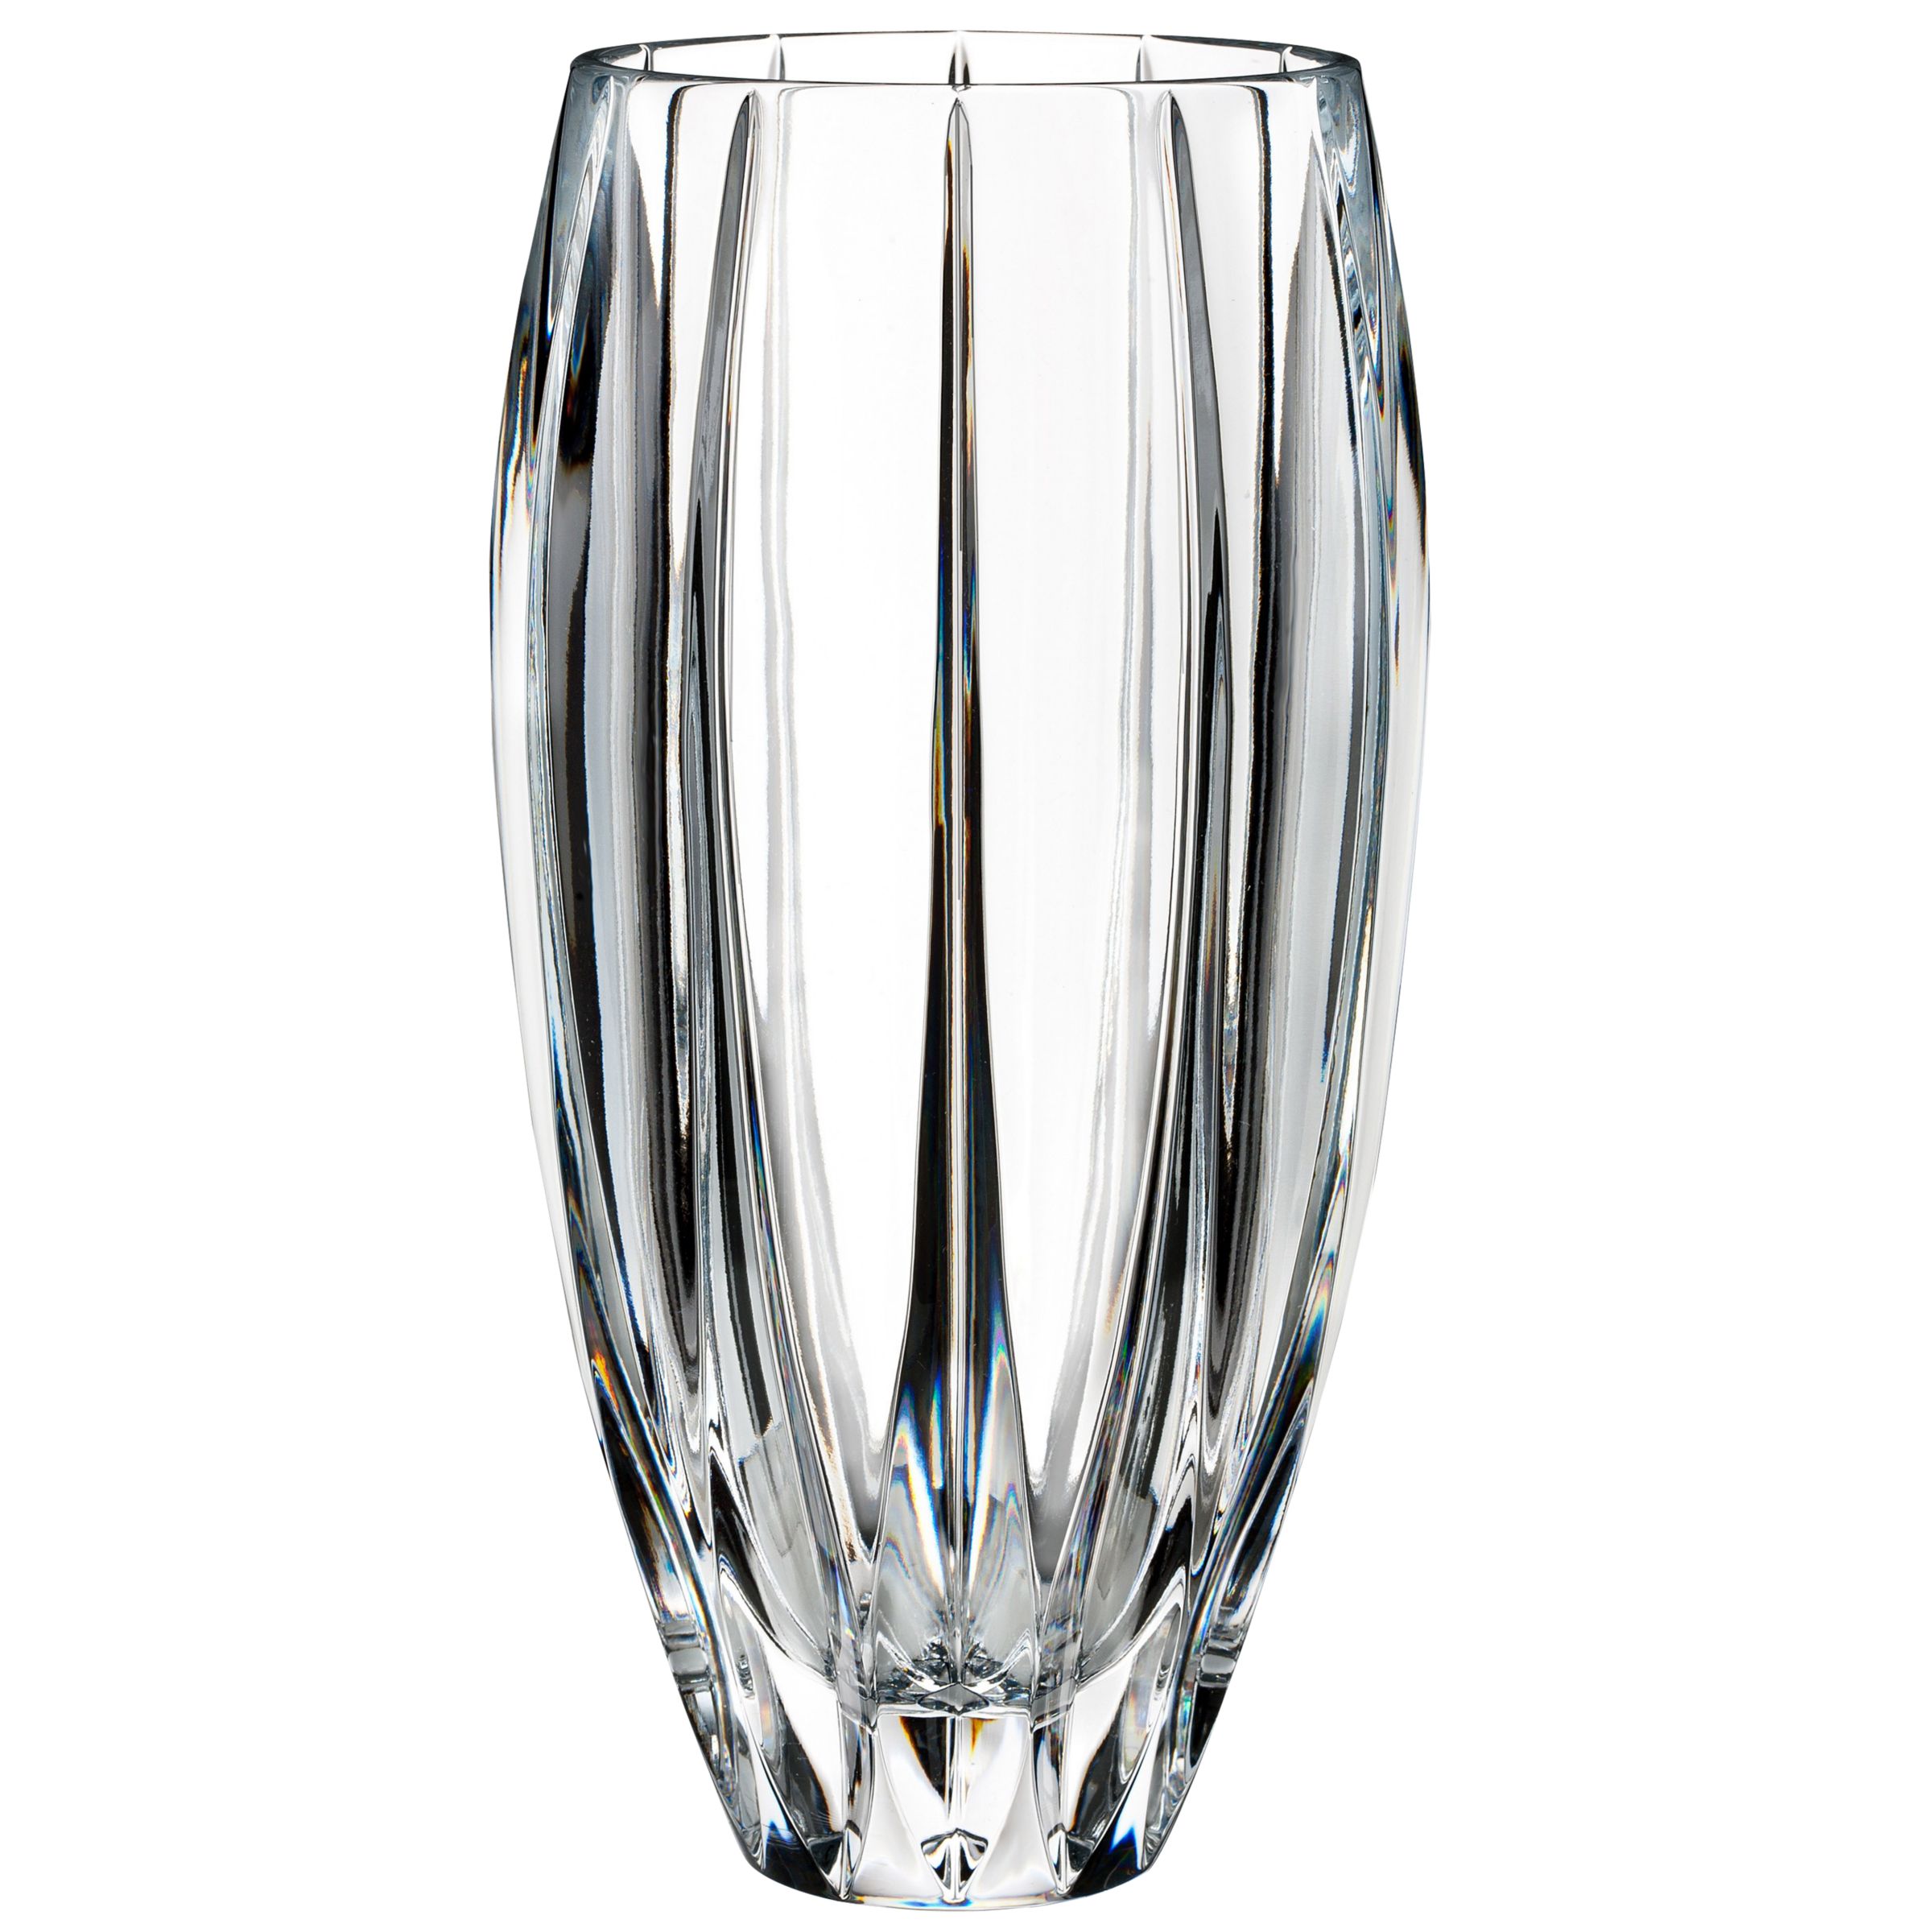 Marquis by Waterford Phoenix Vase, H28cm, Clear